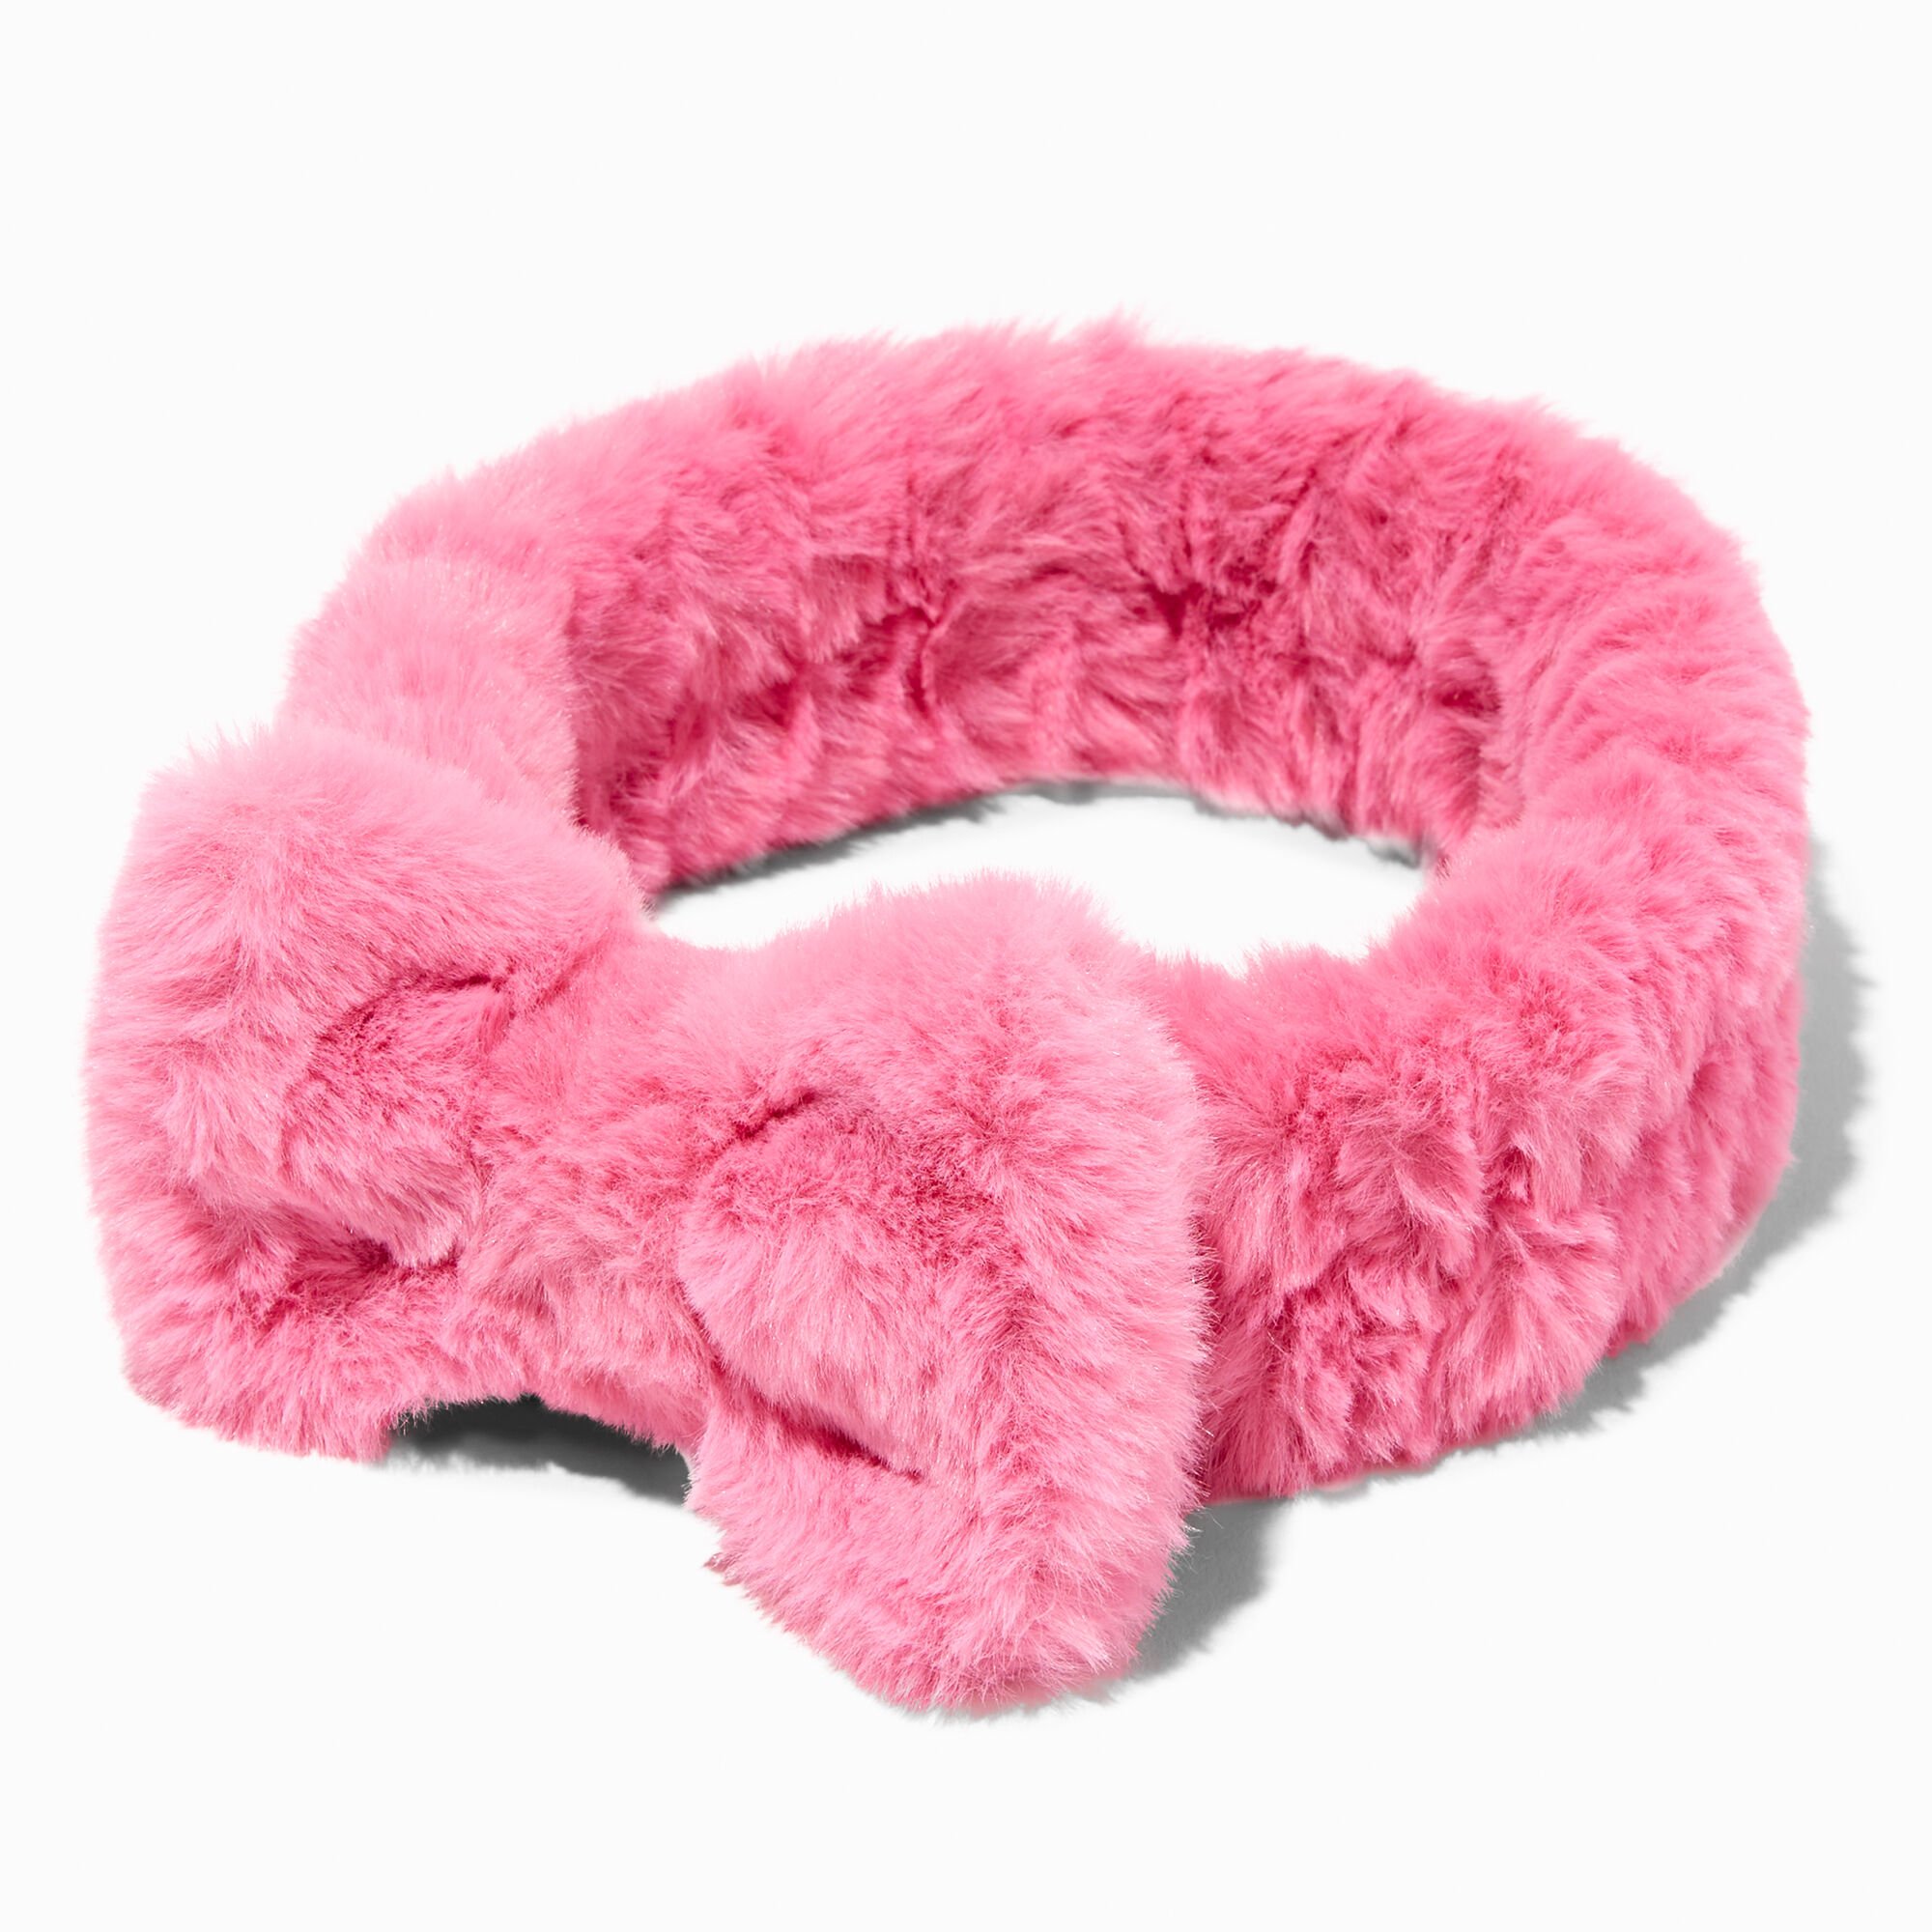 View Claires Hot Furry Makeup Bow Headwrap Pink information